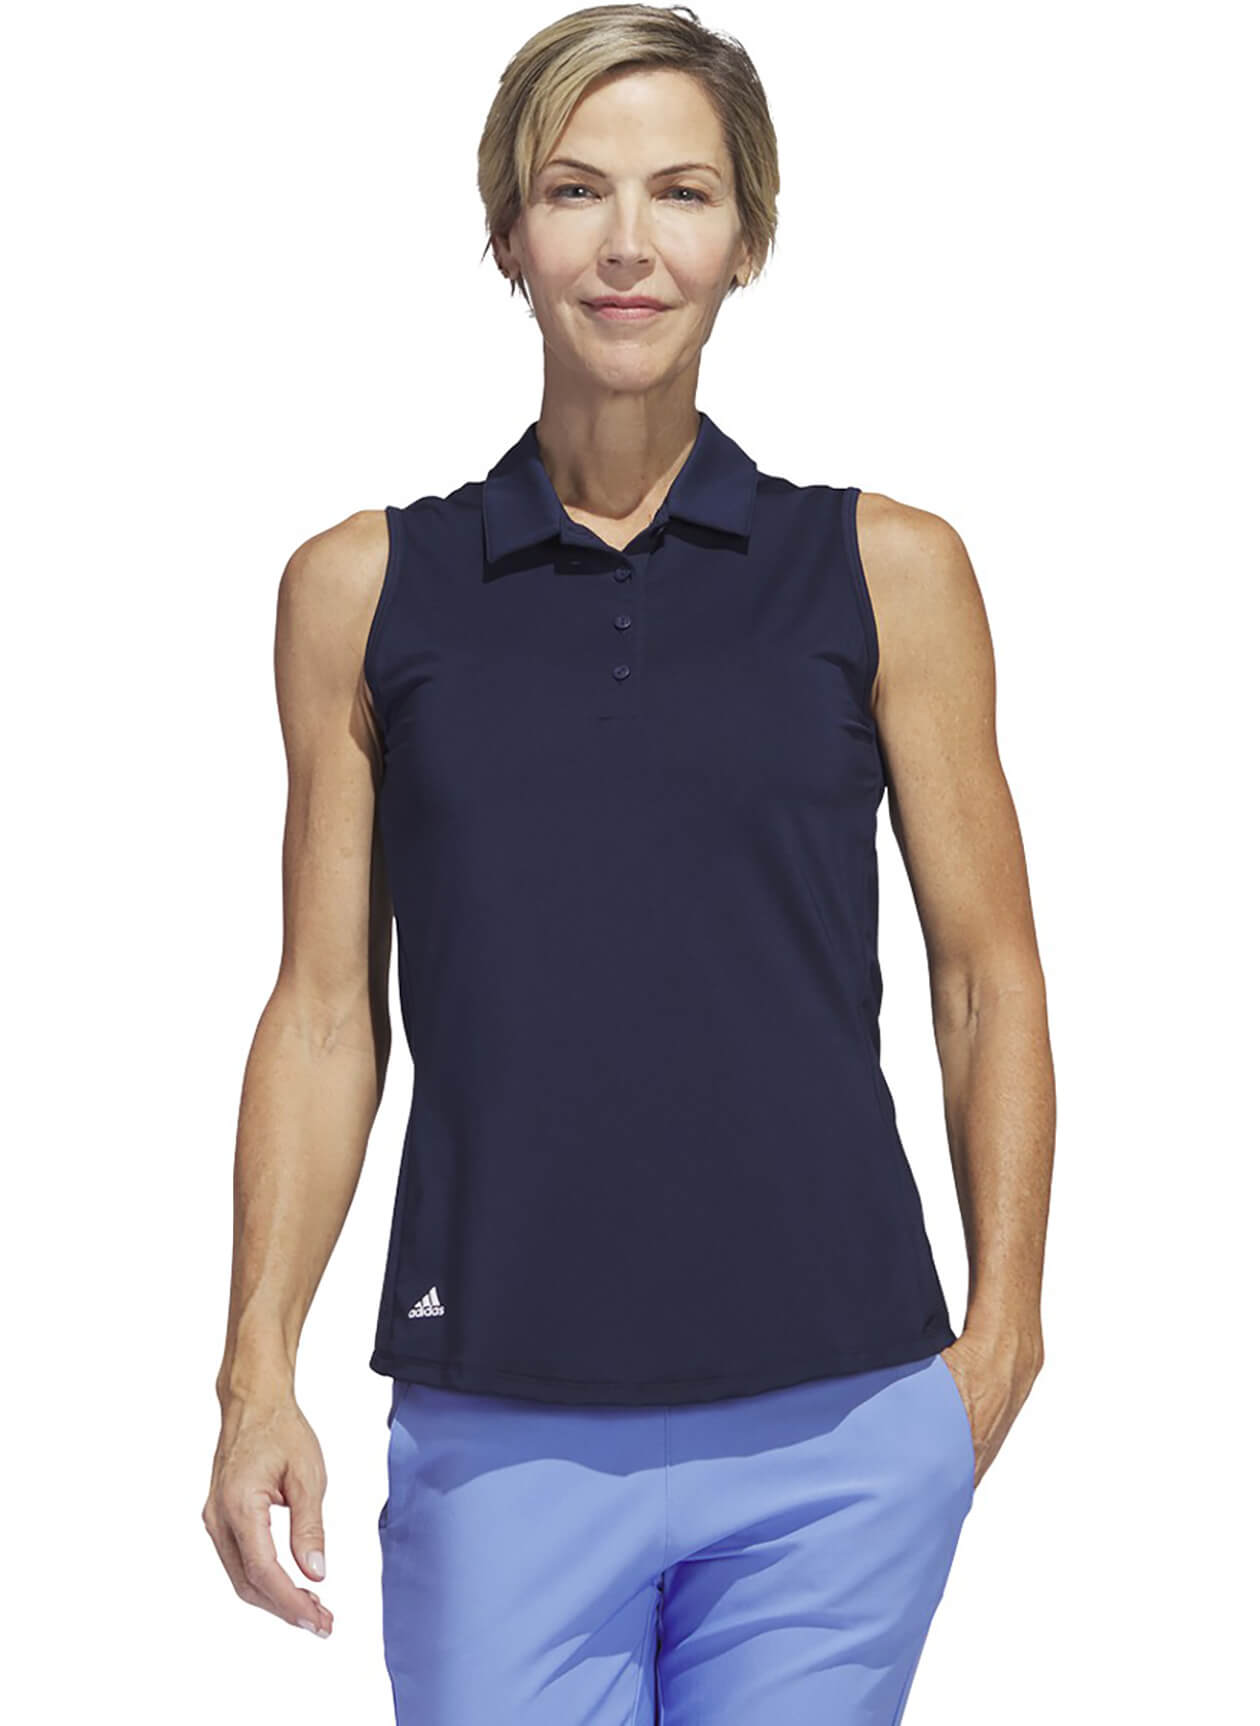 Adidas AD229 - Golf Women's Ultimate 365 Solid Sleeveless Polo